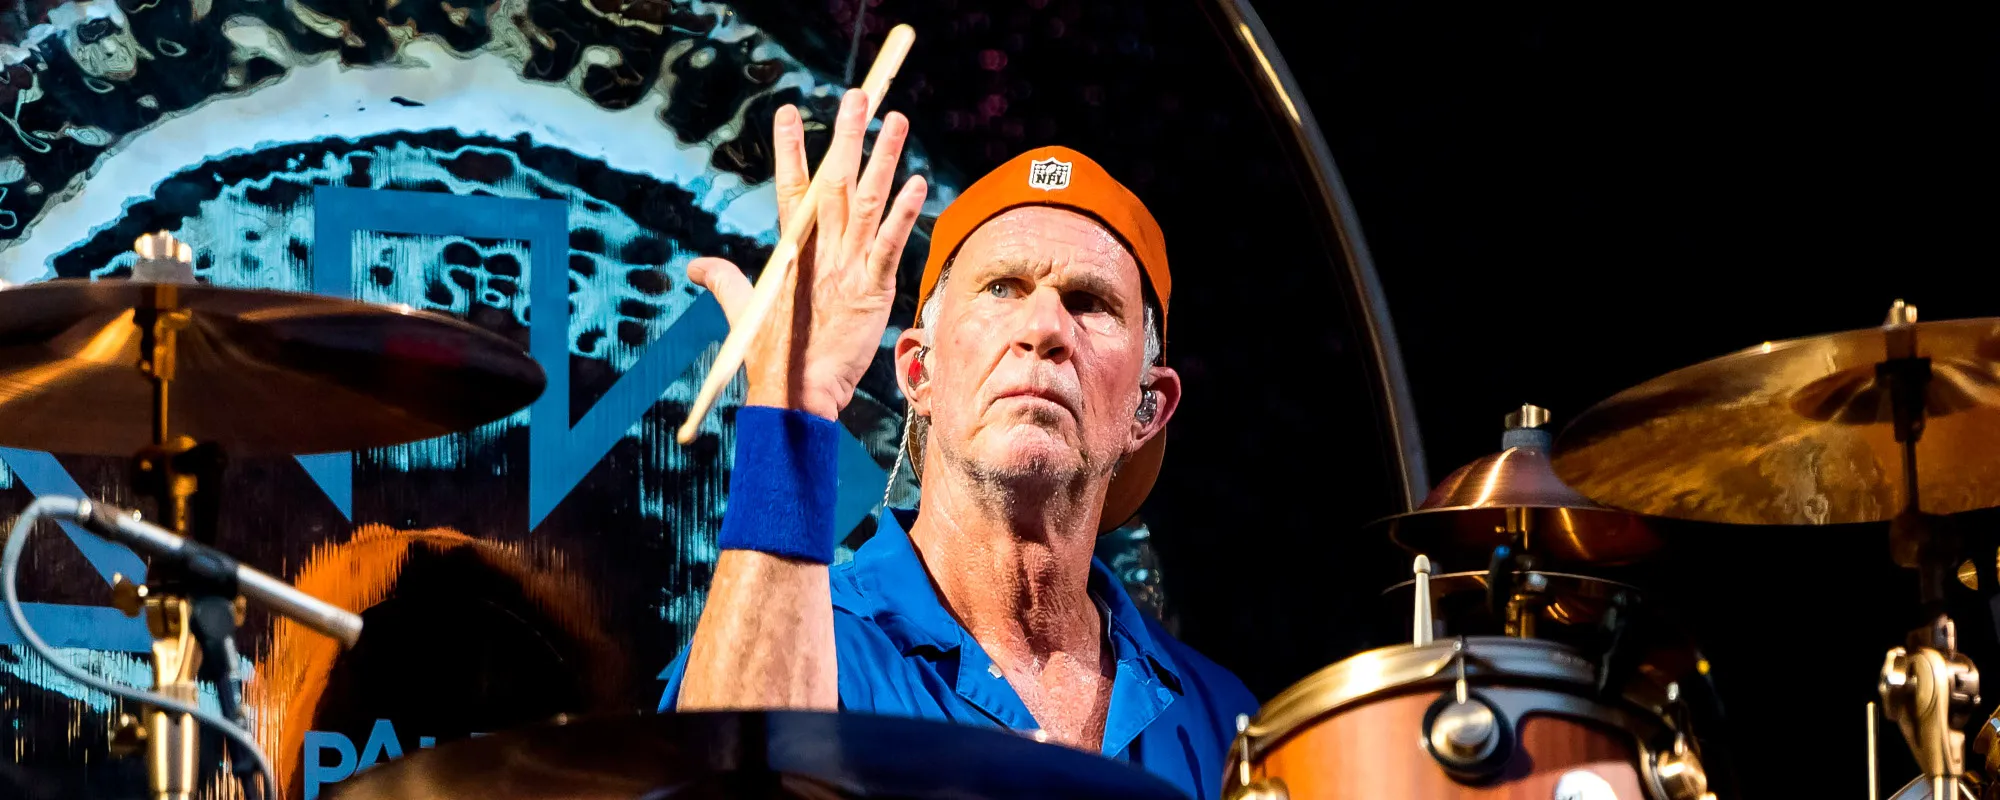 4 Songs You Didn’t Know Red Hot Chili Peppers’ Chad Smith Wrote for Other Artists